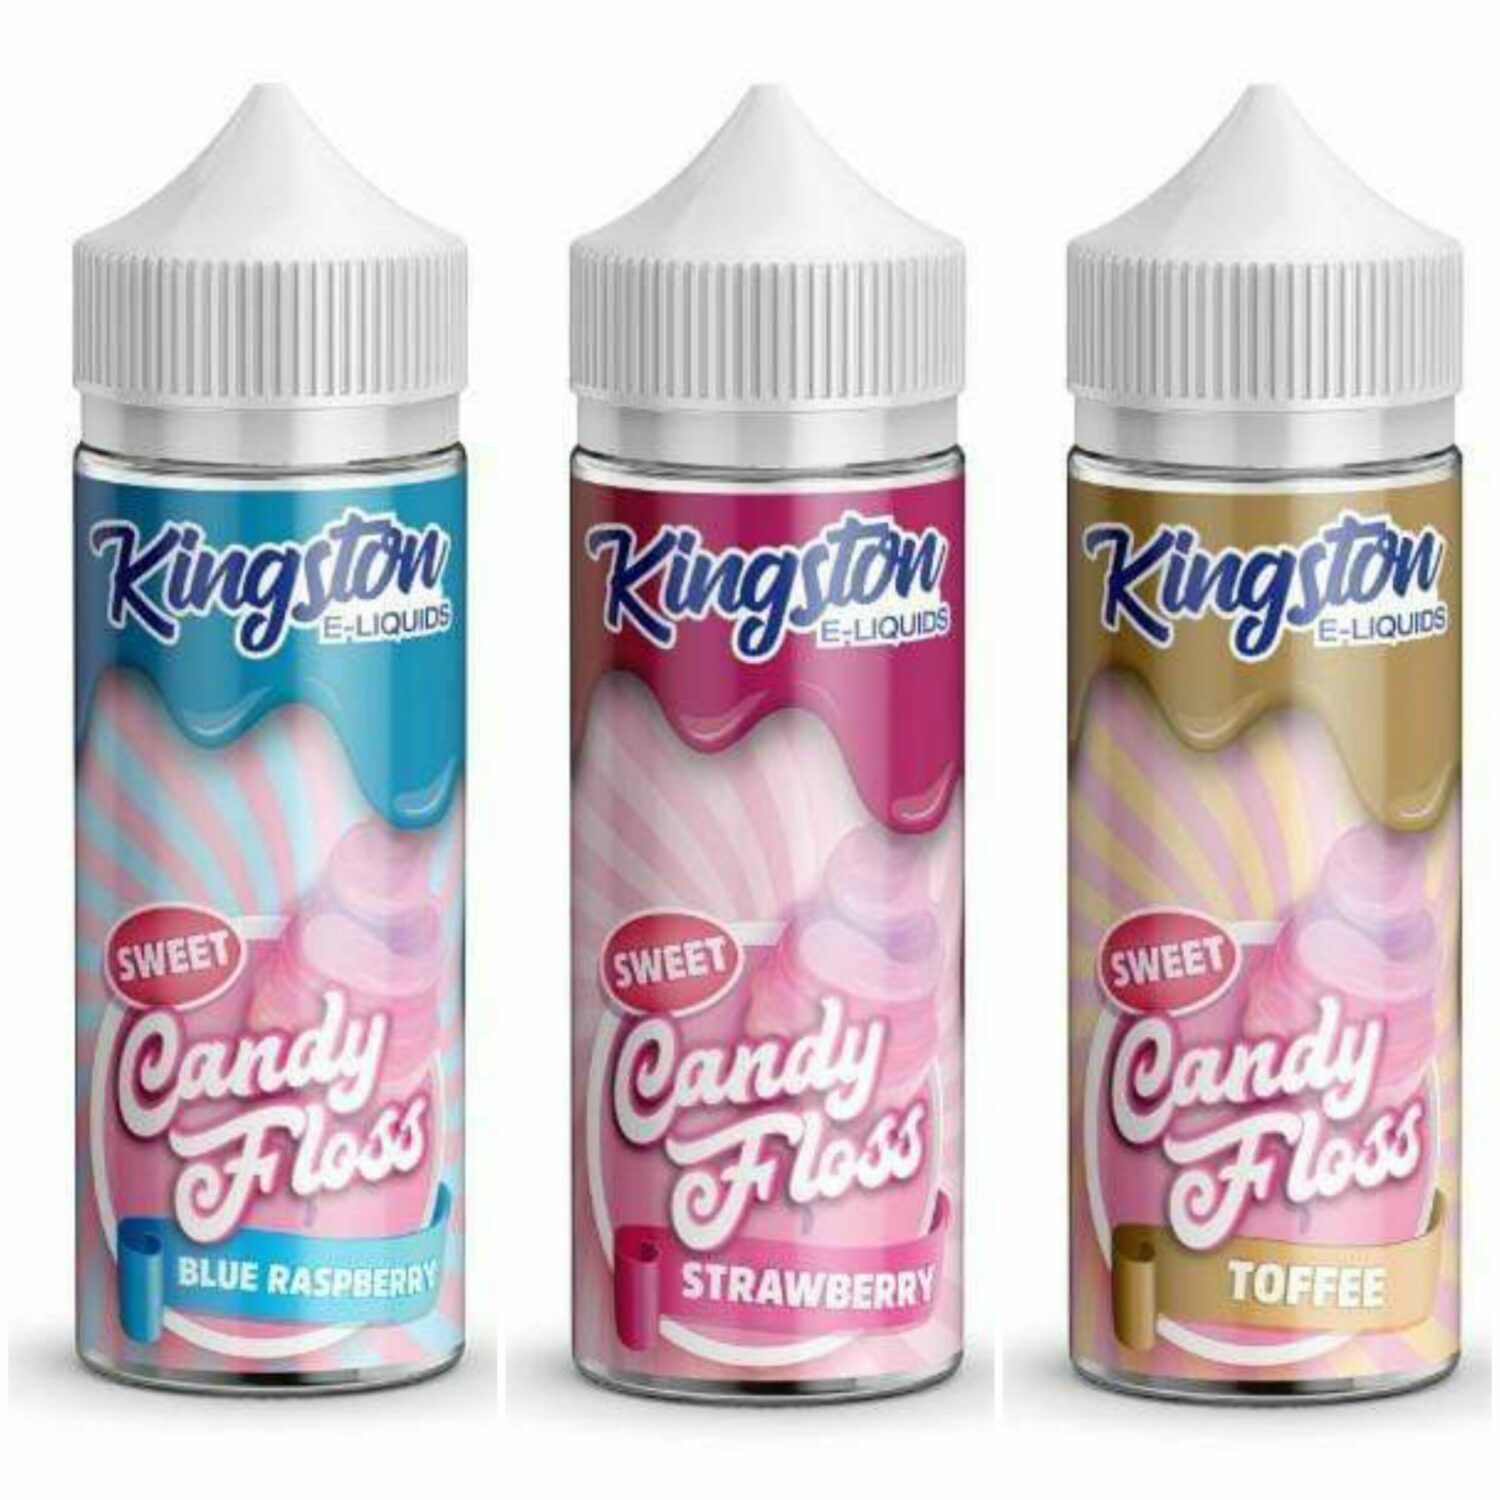 KINGSTON SWEETS CANDY FLOSS SERIES - Juice for Days